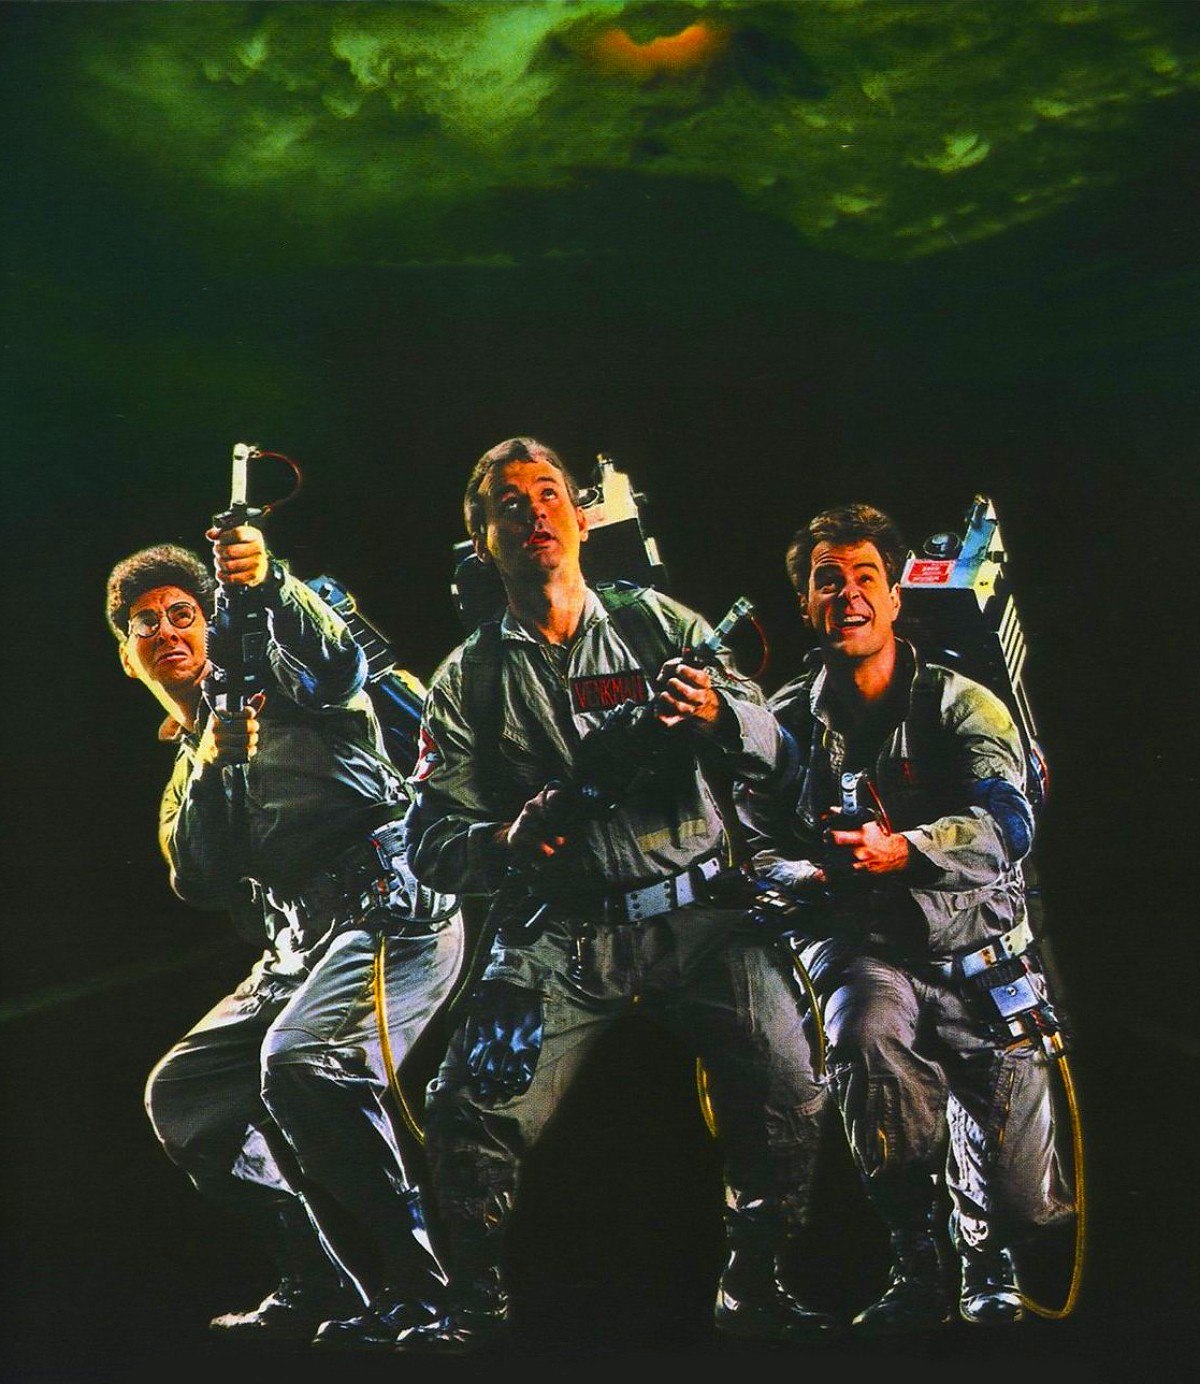 Poster for the film "Ghostbusters" (1984)